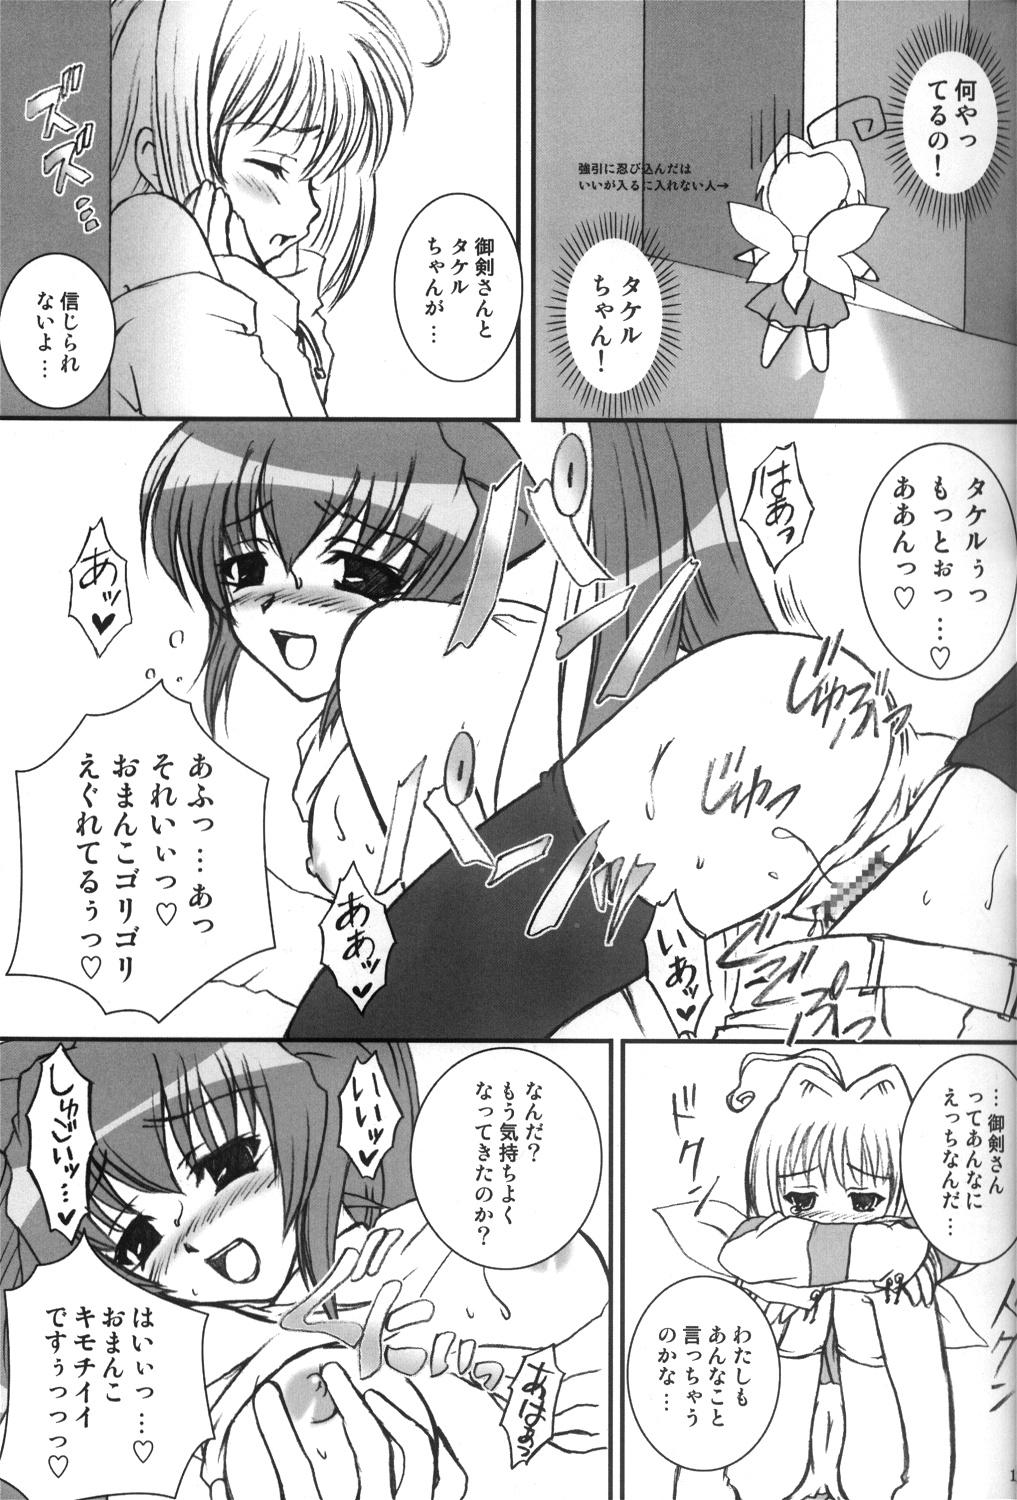 Her I have fallen in love with you... - Muv-luv Blowjob - Page 12